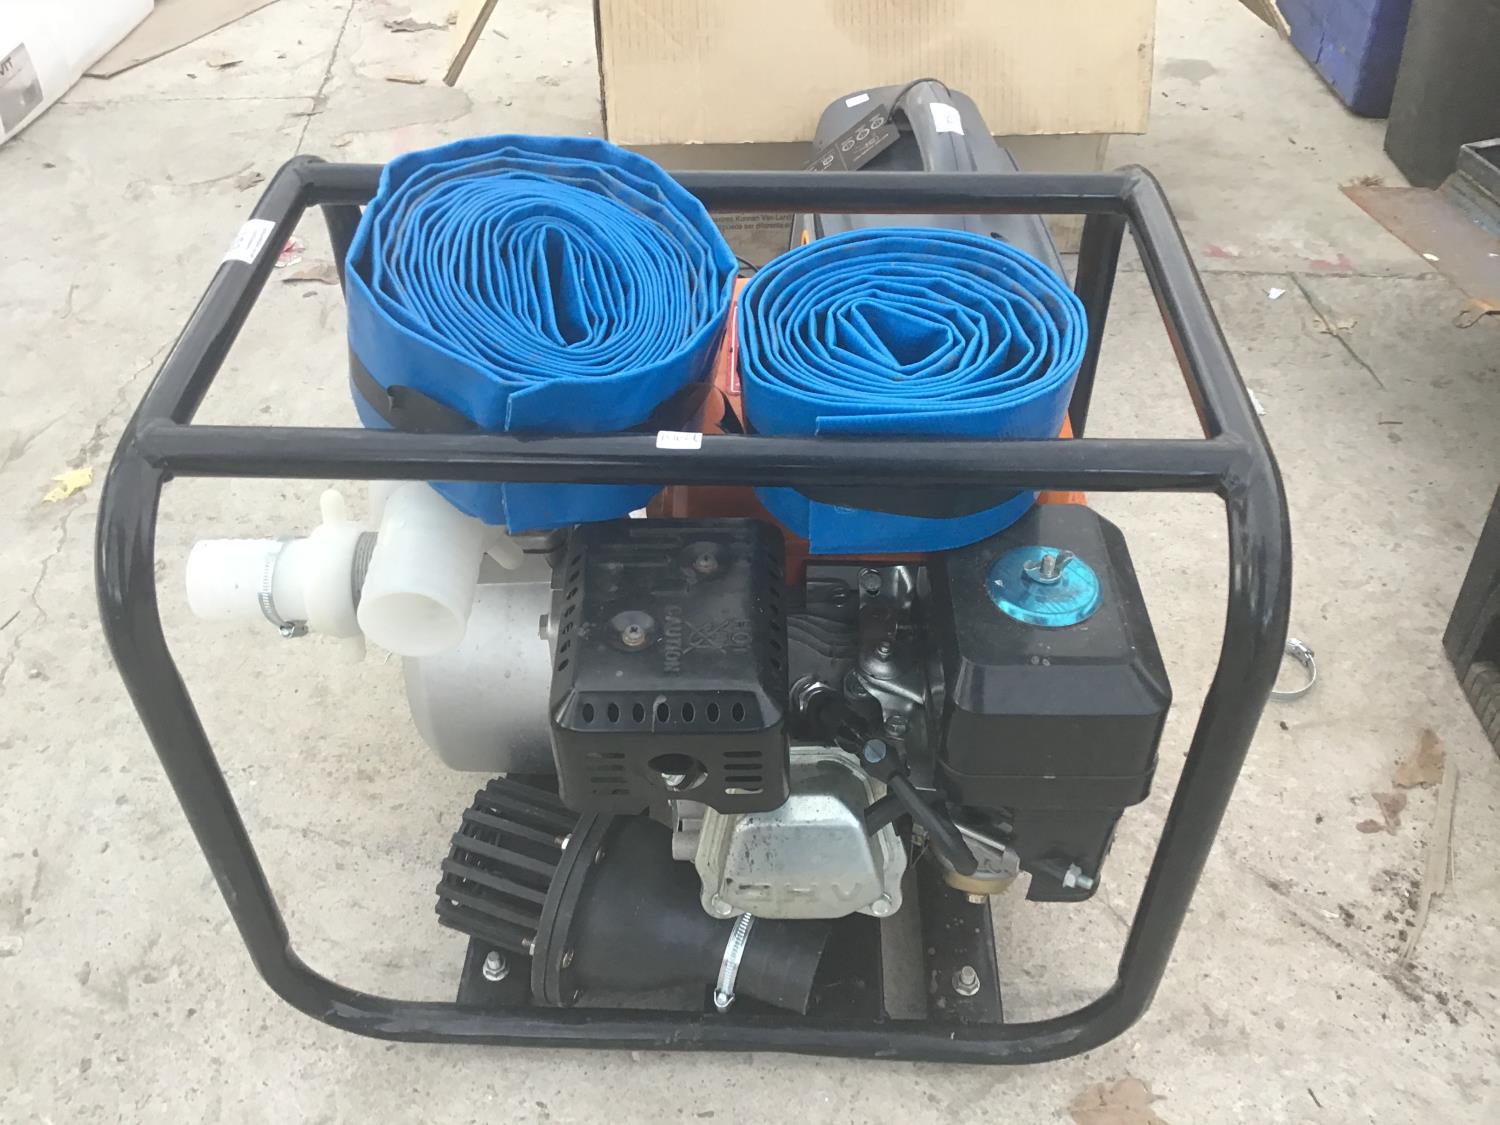 A HABA TRADING VIDA XL PETROL WATER PUMP WITH HOSES IN WORKING ORDER - Image 3 of 3